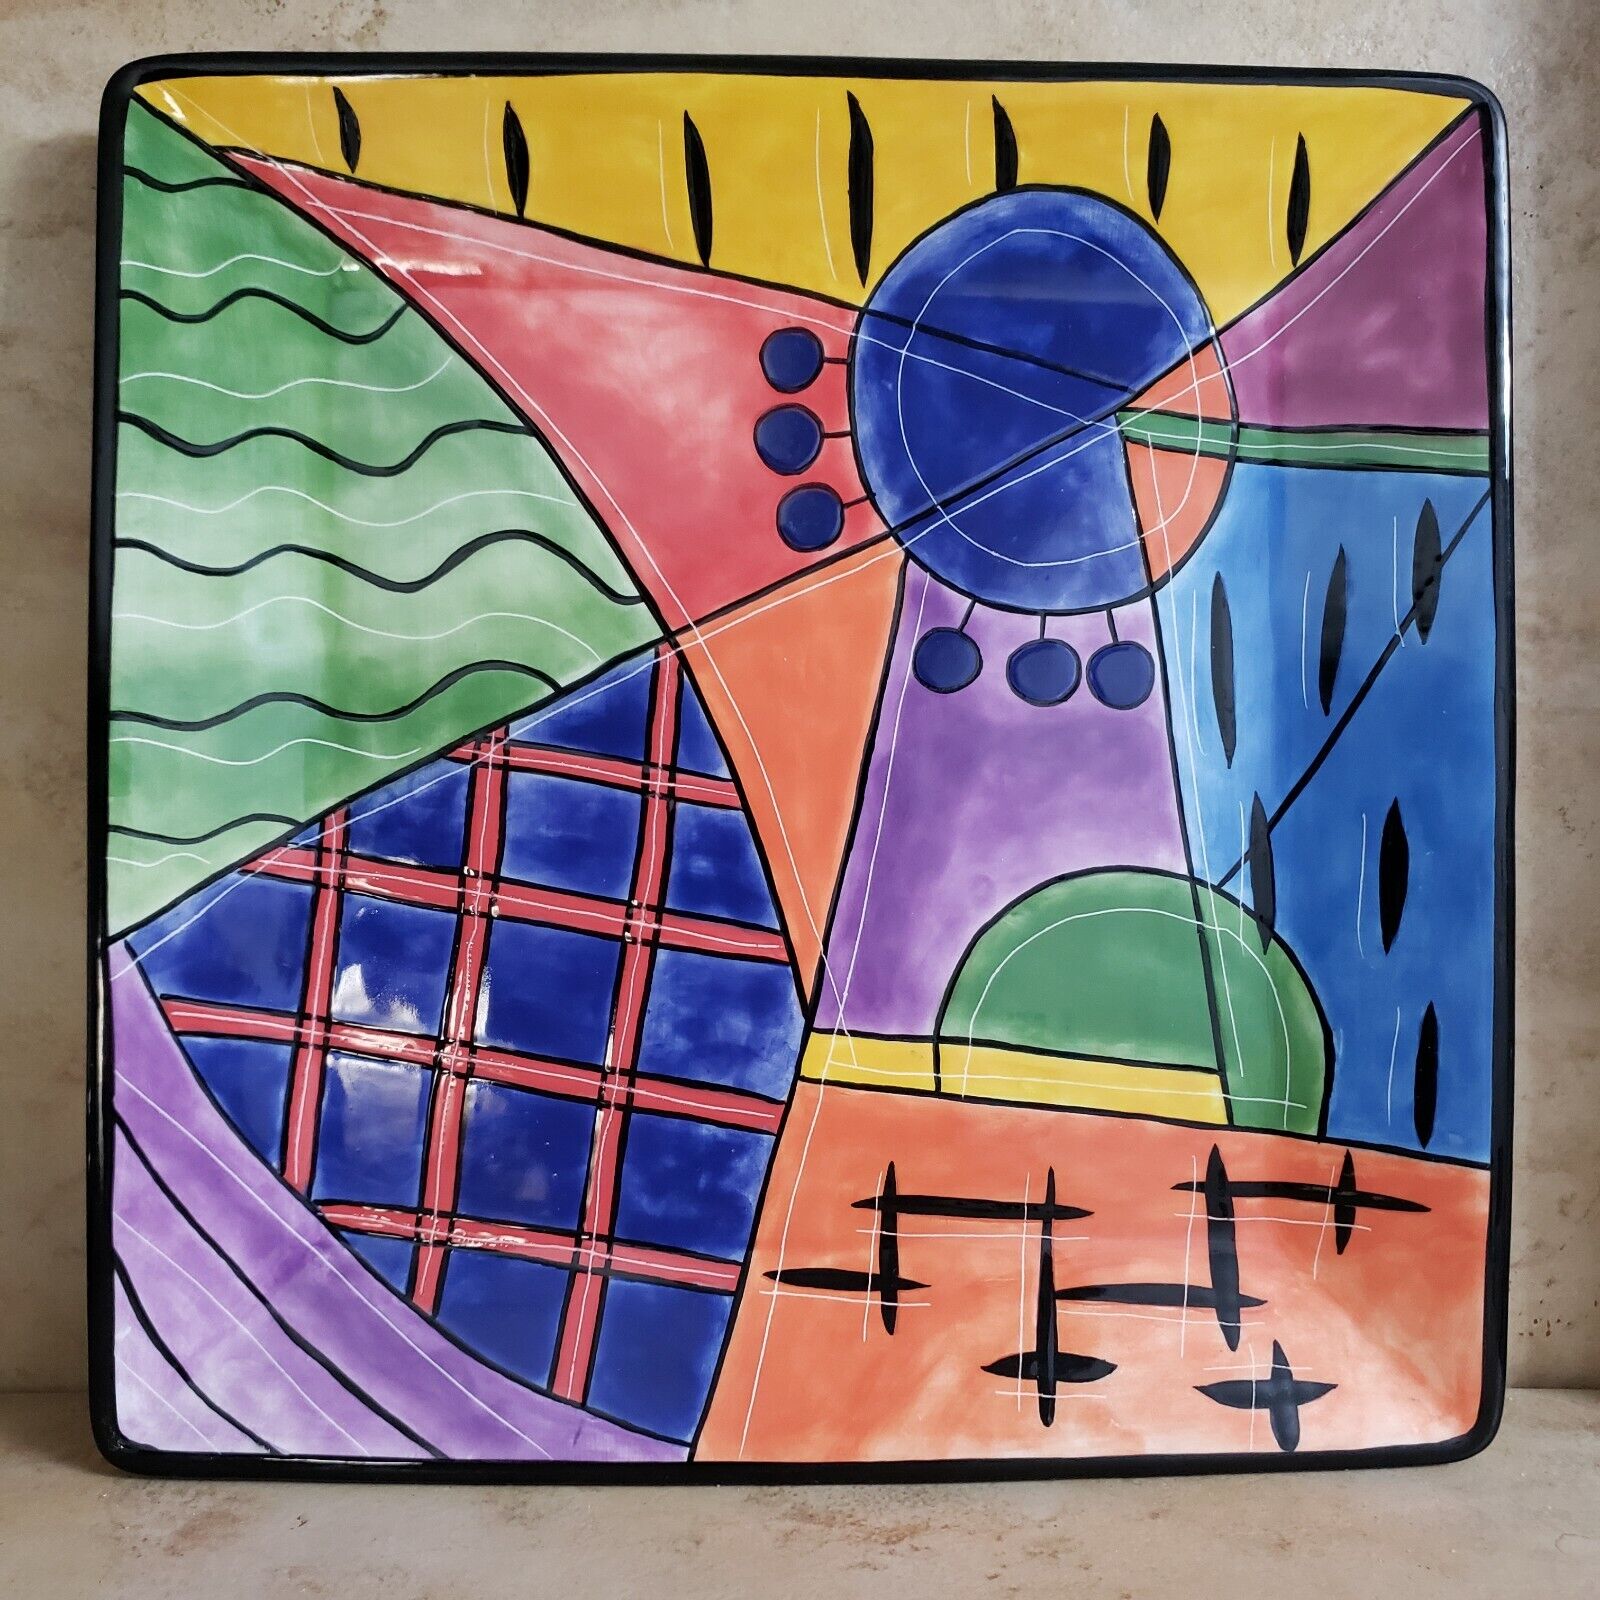 MUZEUM~CERAMIC PICASSO STYLE~SQUARE PLATE TRAY PLATTER~ CUBISM ABSTRACT